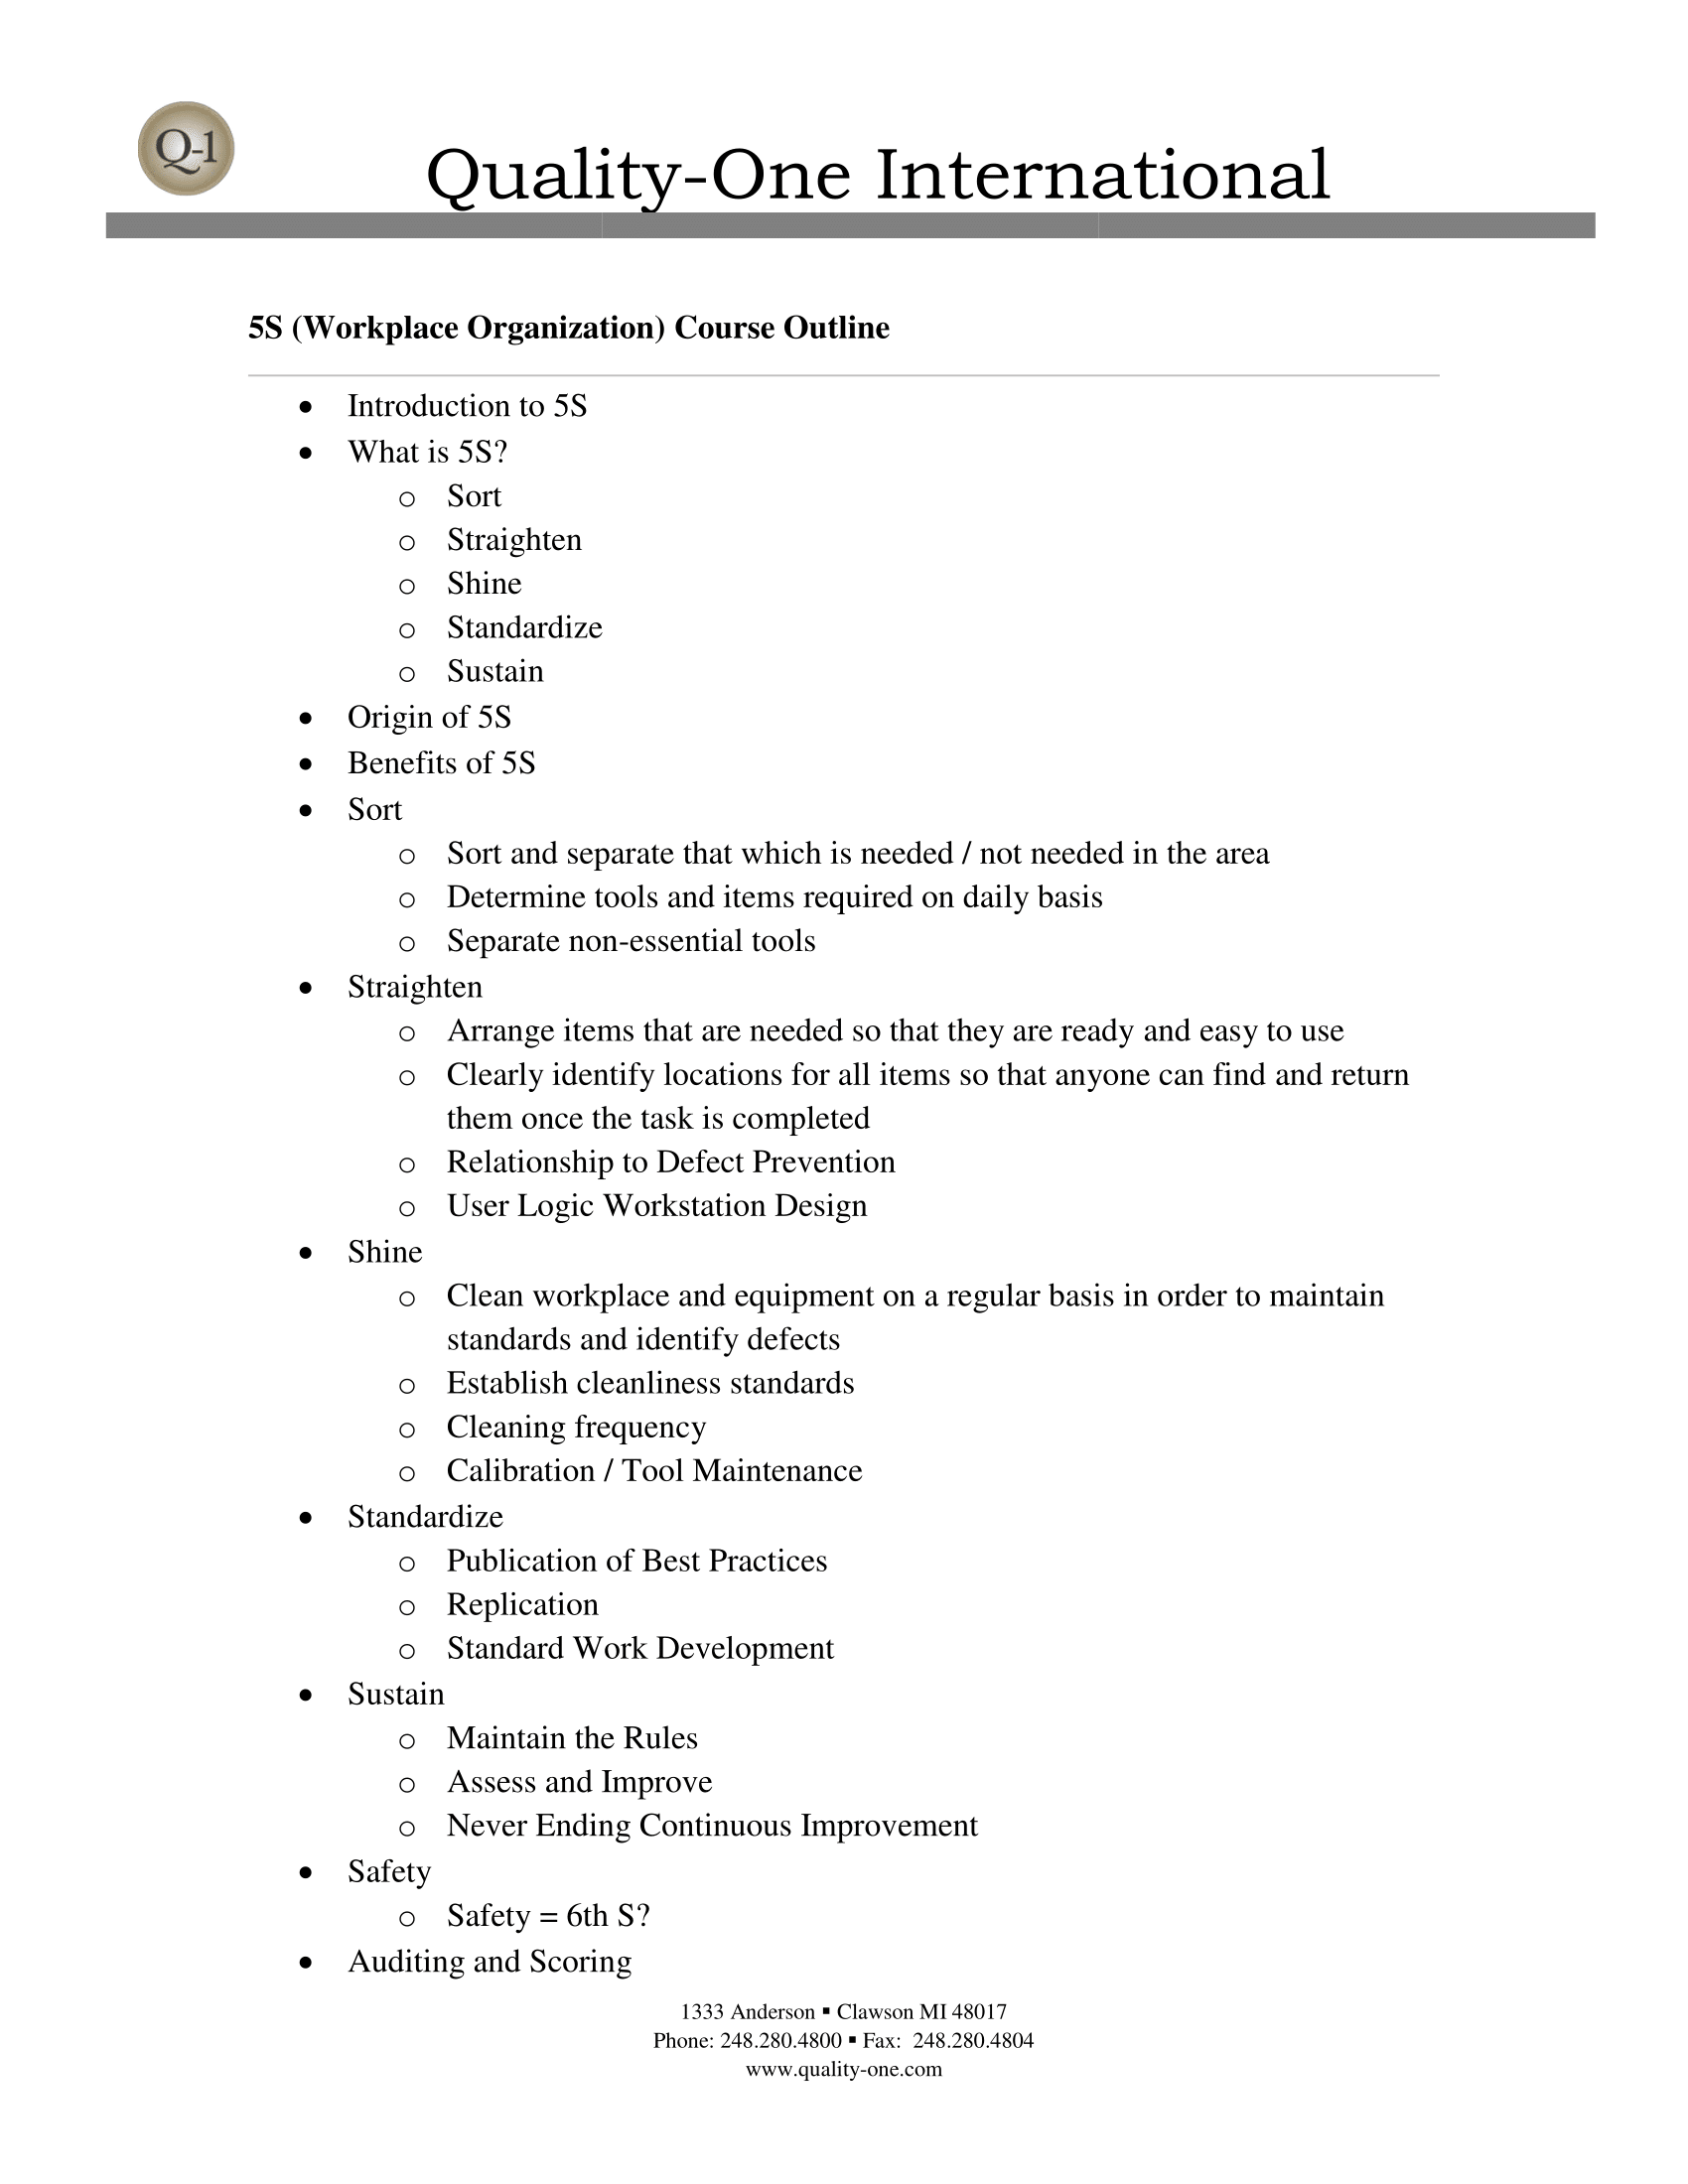 5S Training Course Outline